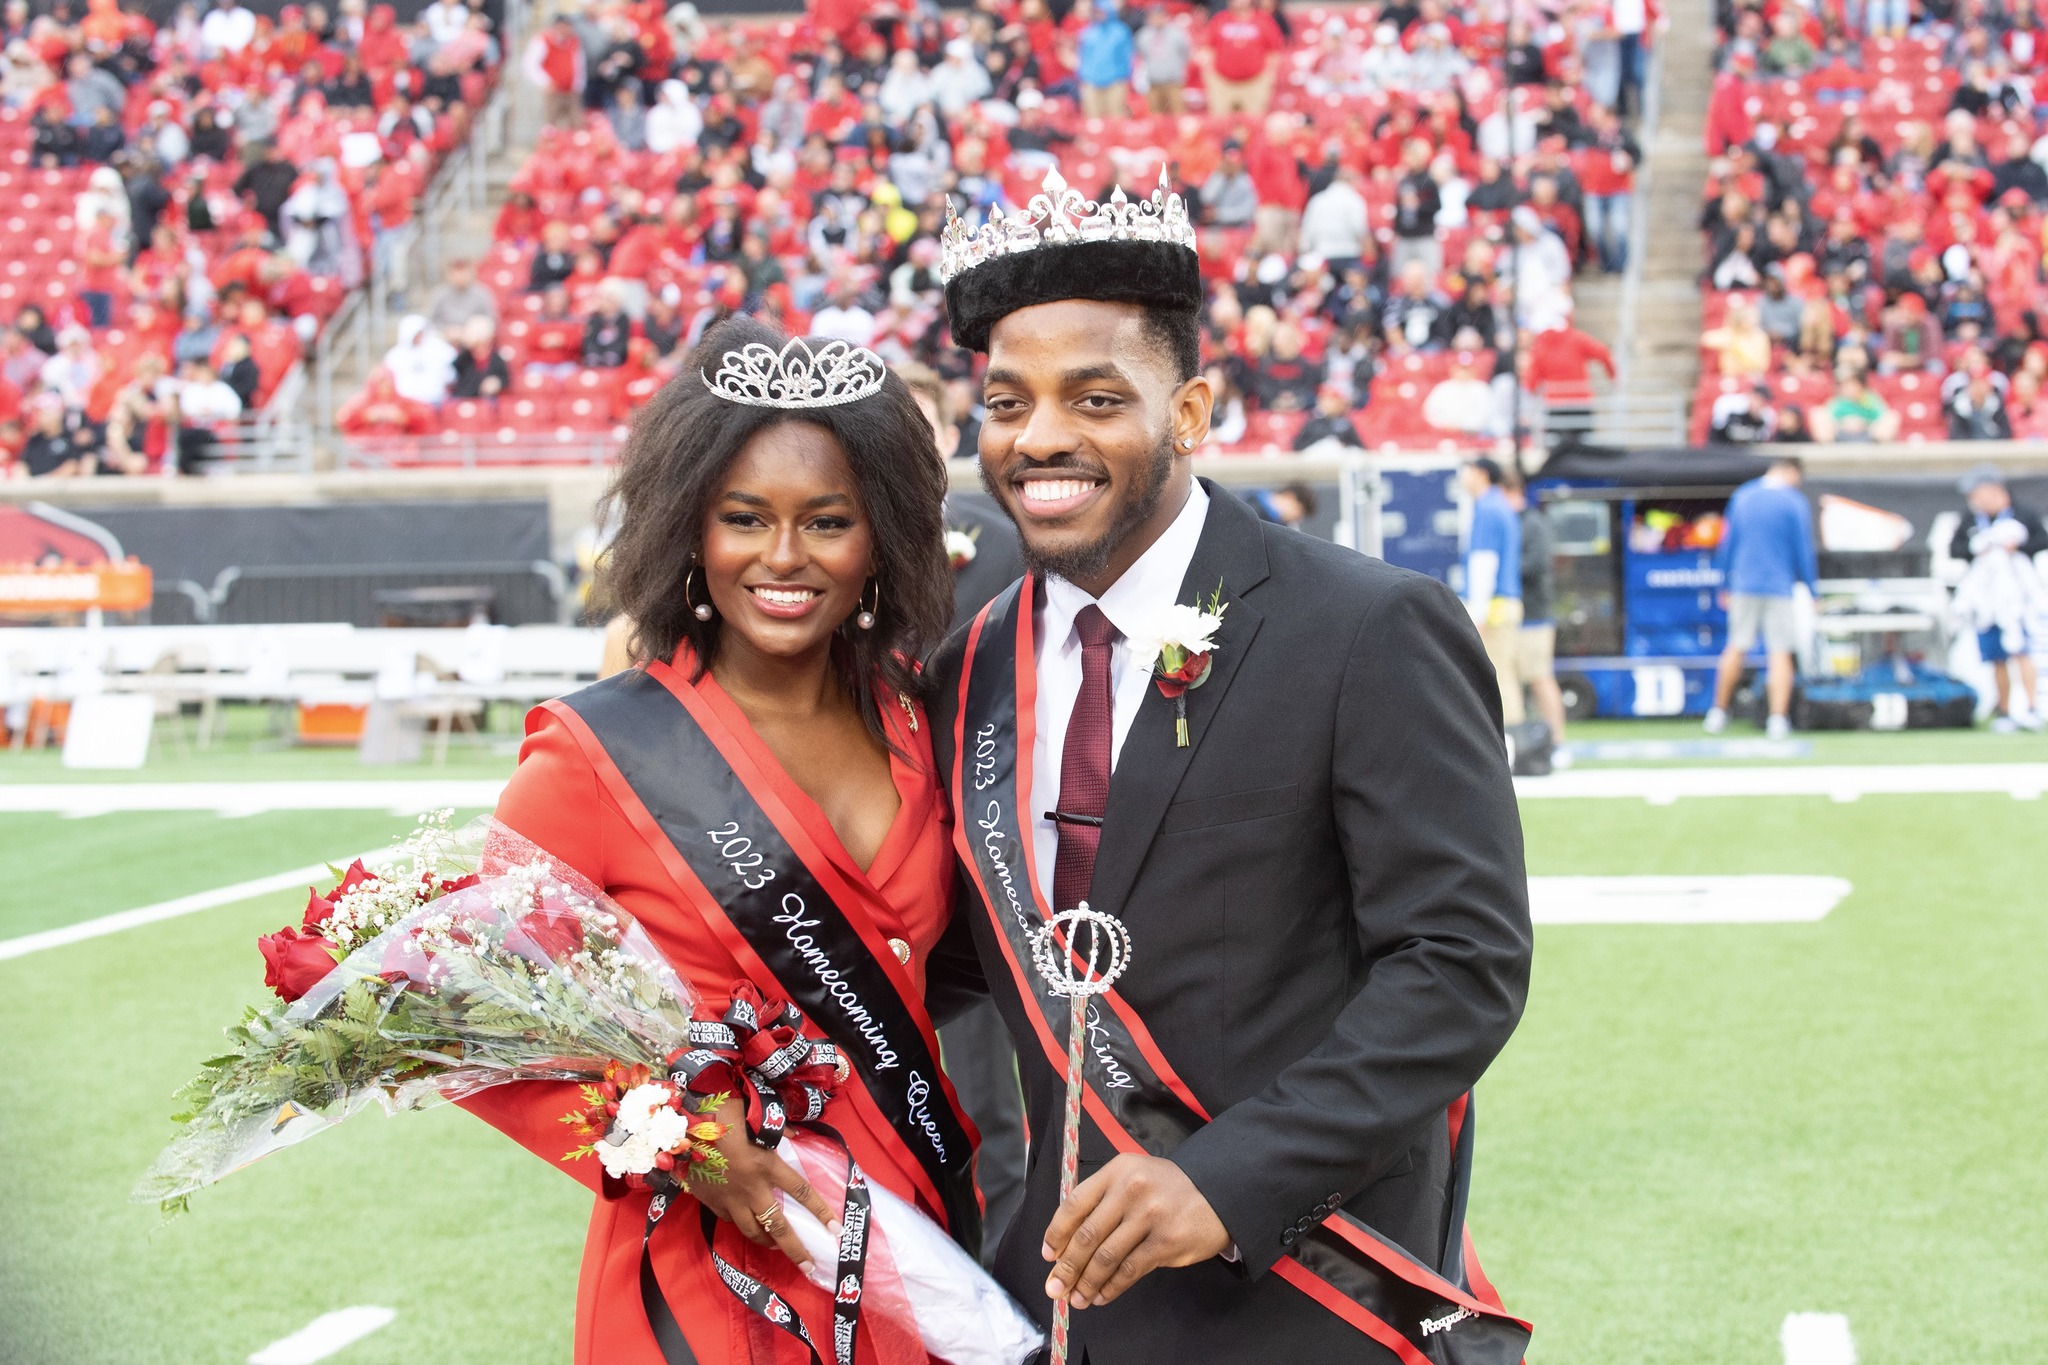 McConnell Scholar named 2023 UofL Homecoming Queen